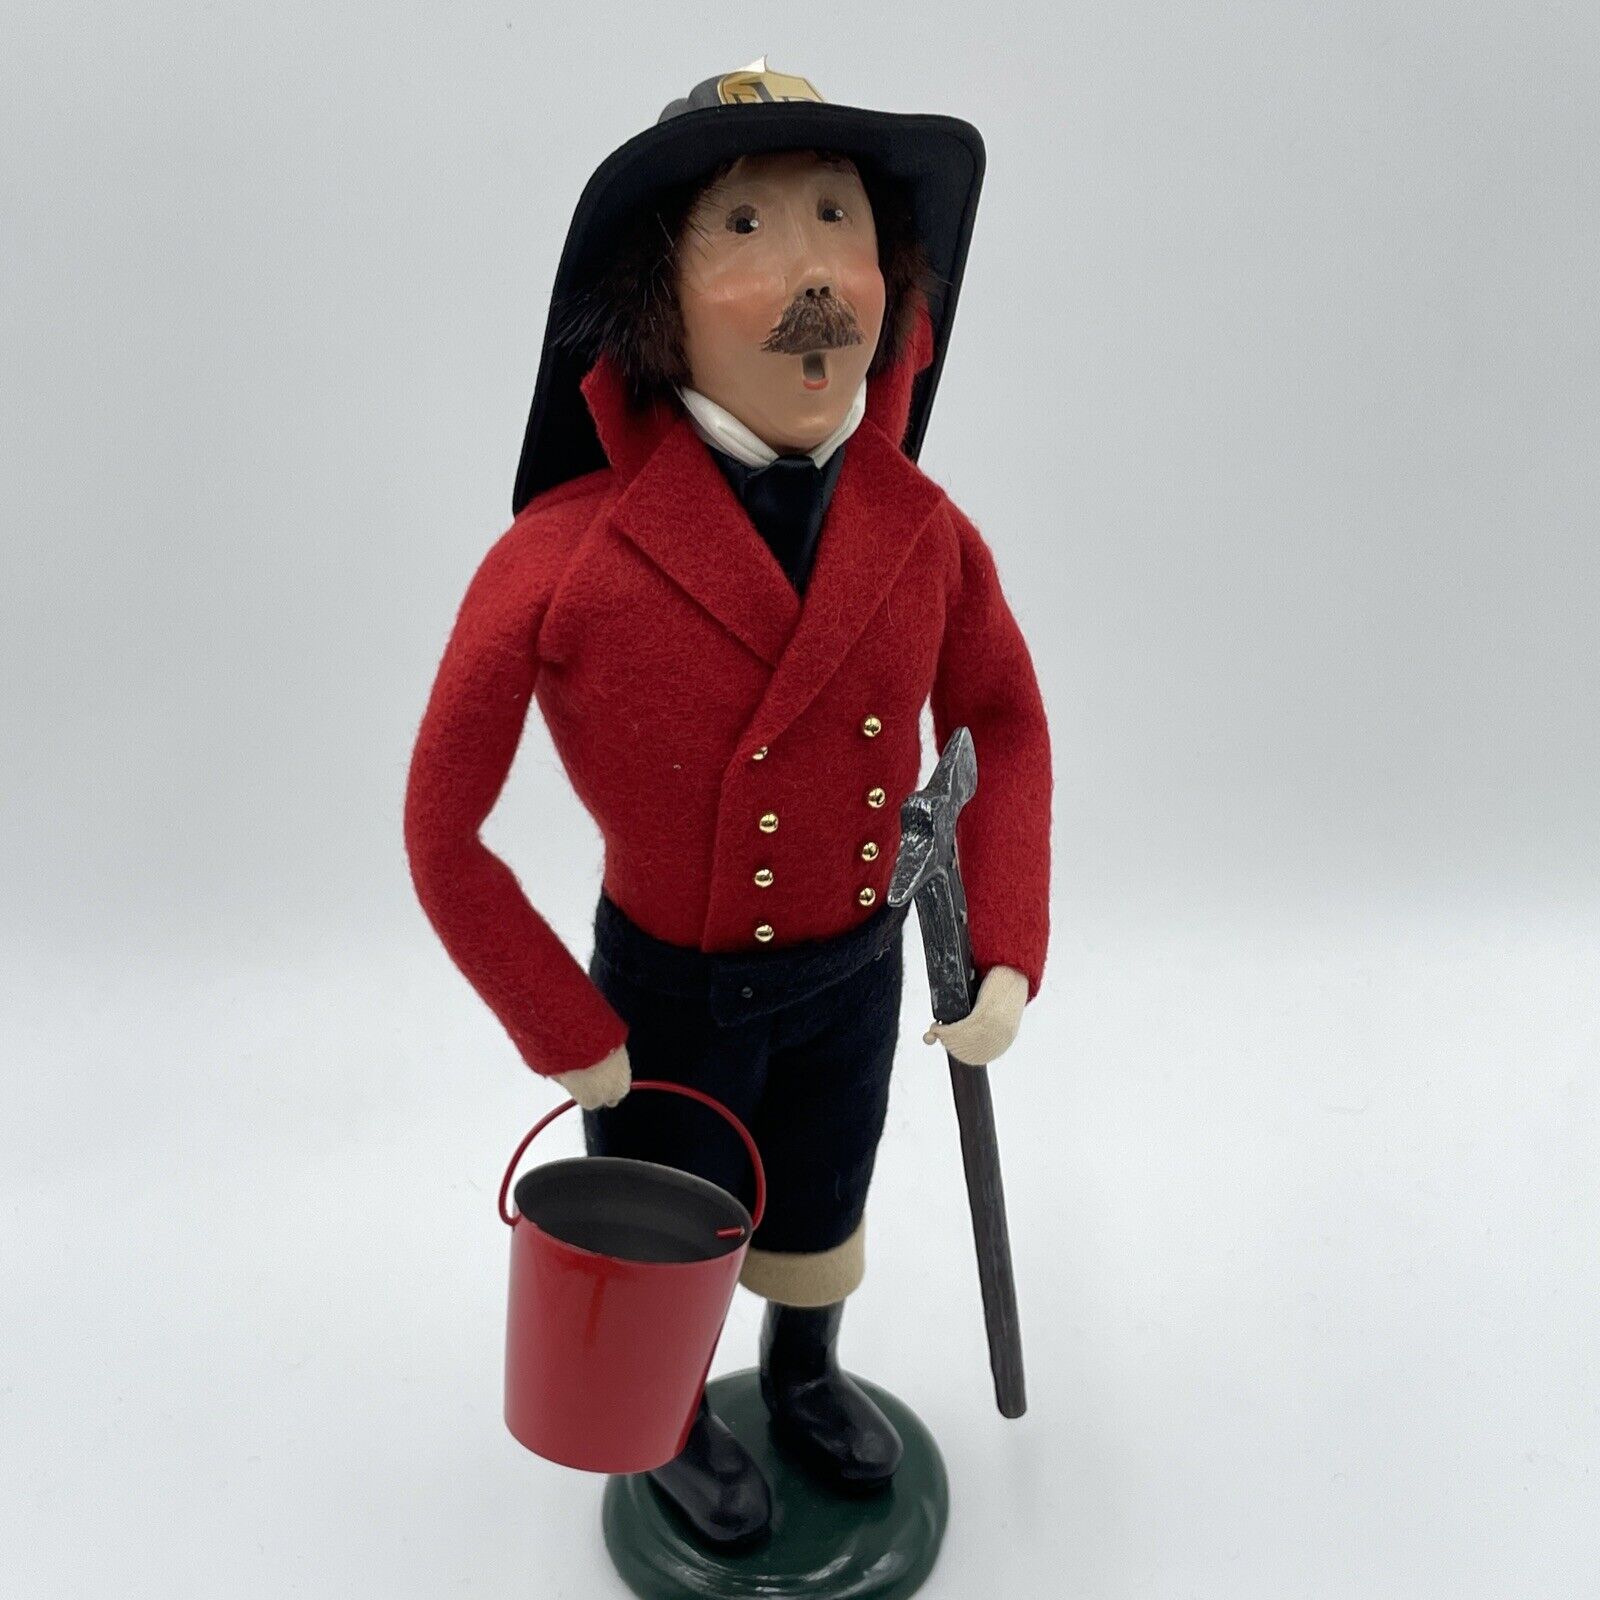 BYERS CHOICE CAROLERS 2001 VICTORIAN FIREFIGHTER FIREMAN WITH AXE VTG